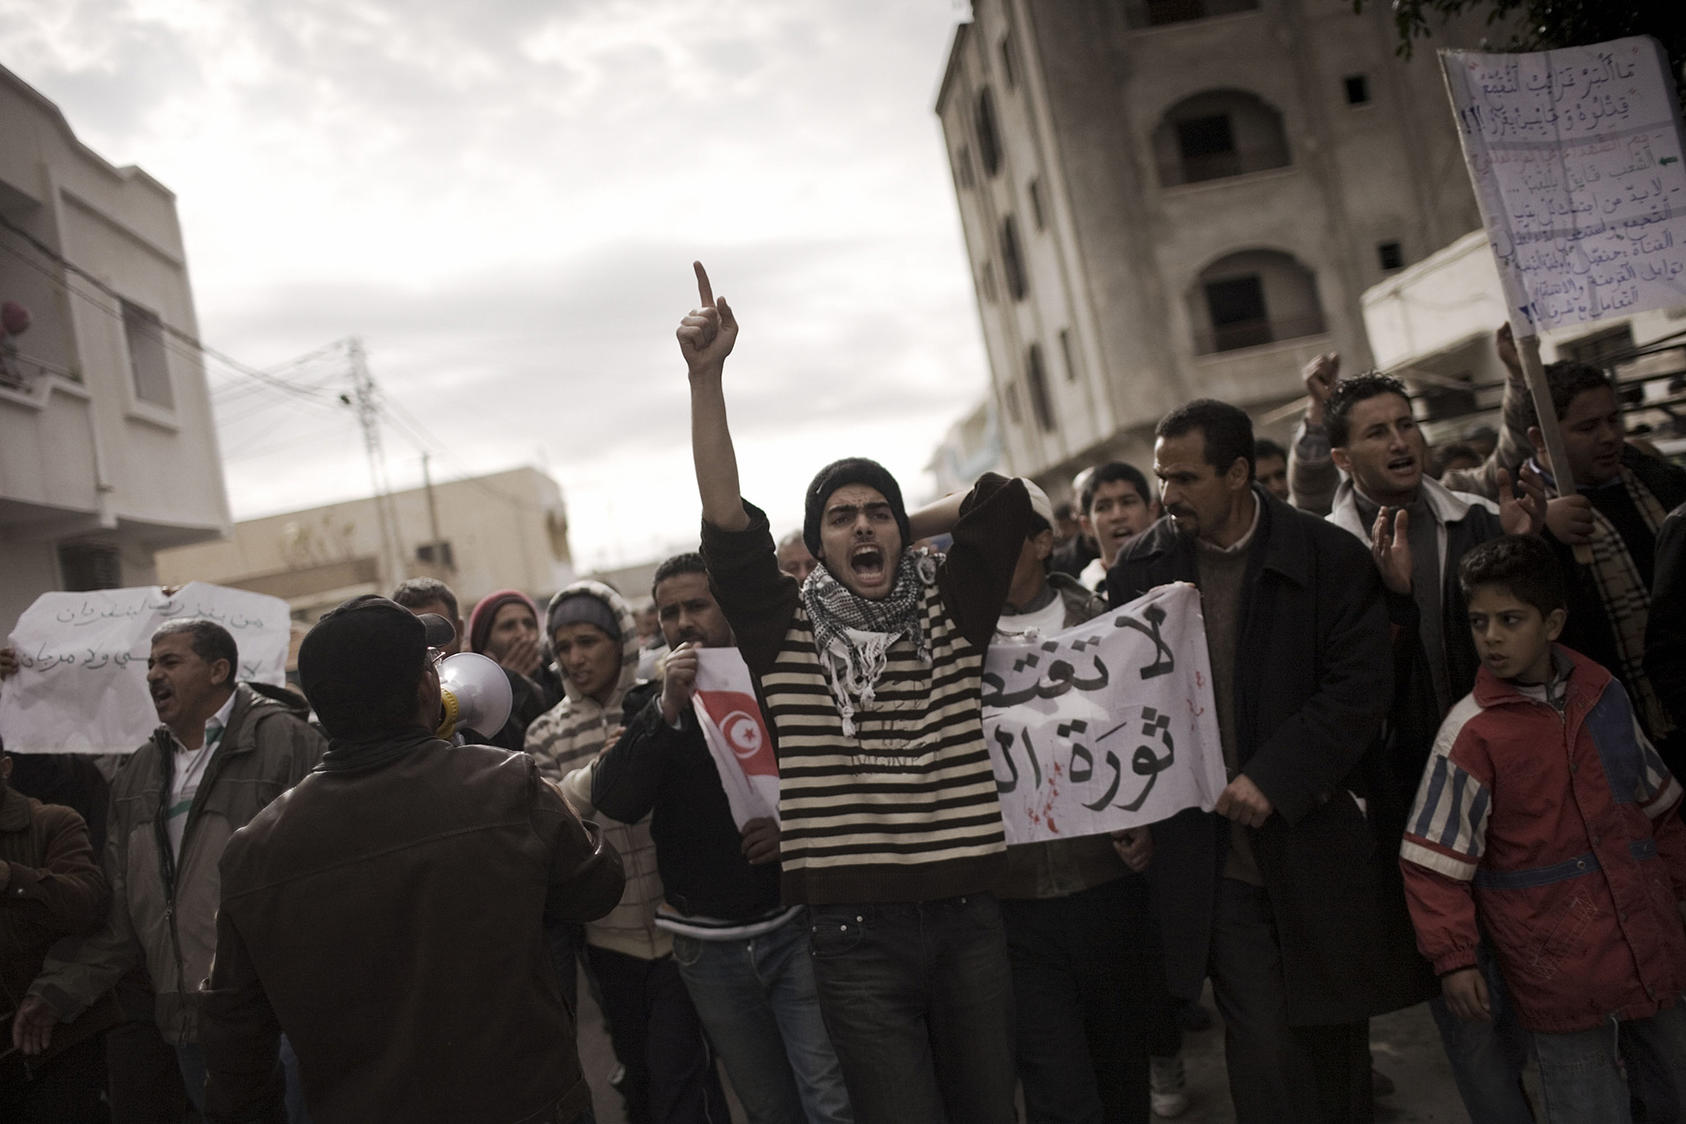 Protesters chant slogans against the political party of ousted President Zine el-Abedine Ben Ali in Sidi Bouzid, Tunisia, on Jan. 21, 2011. (Moises Saman/The New York Times)